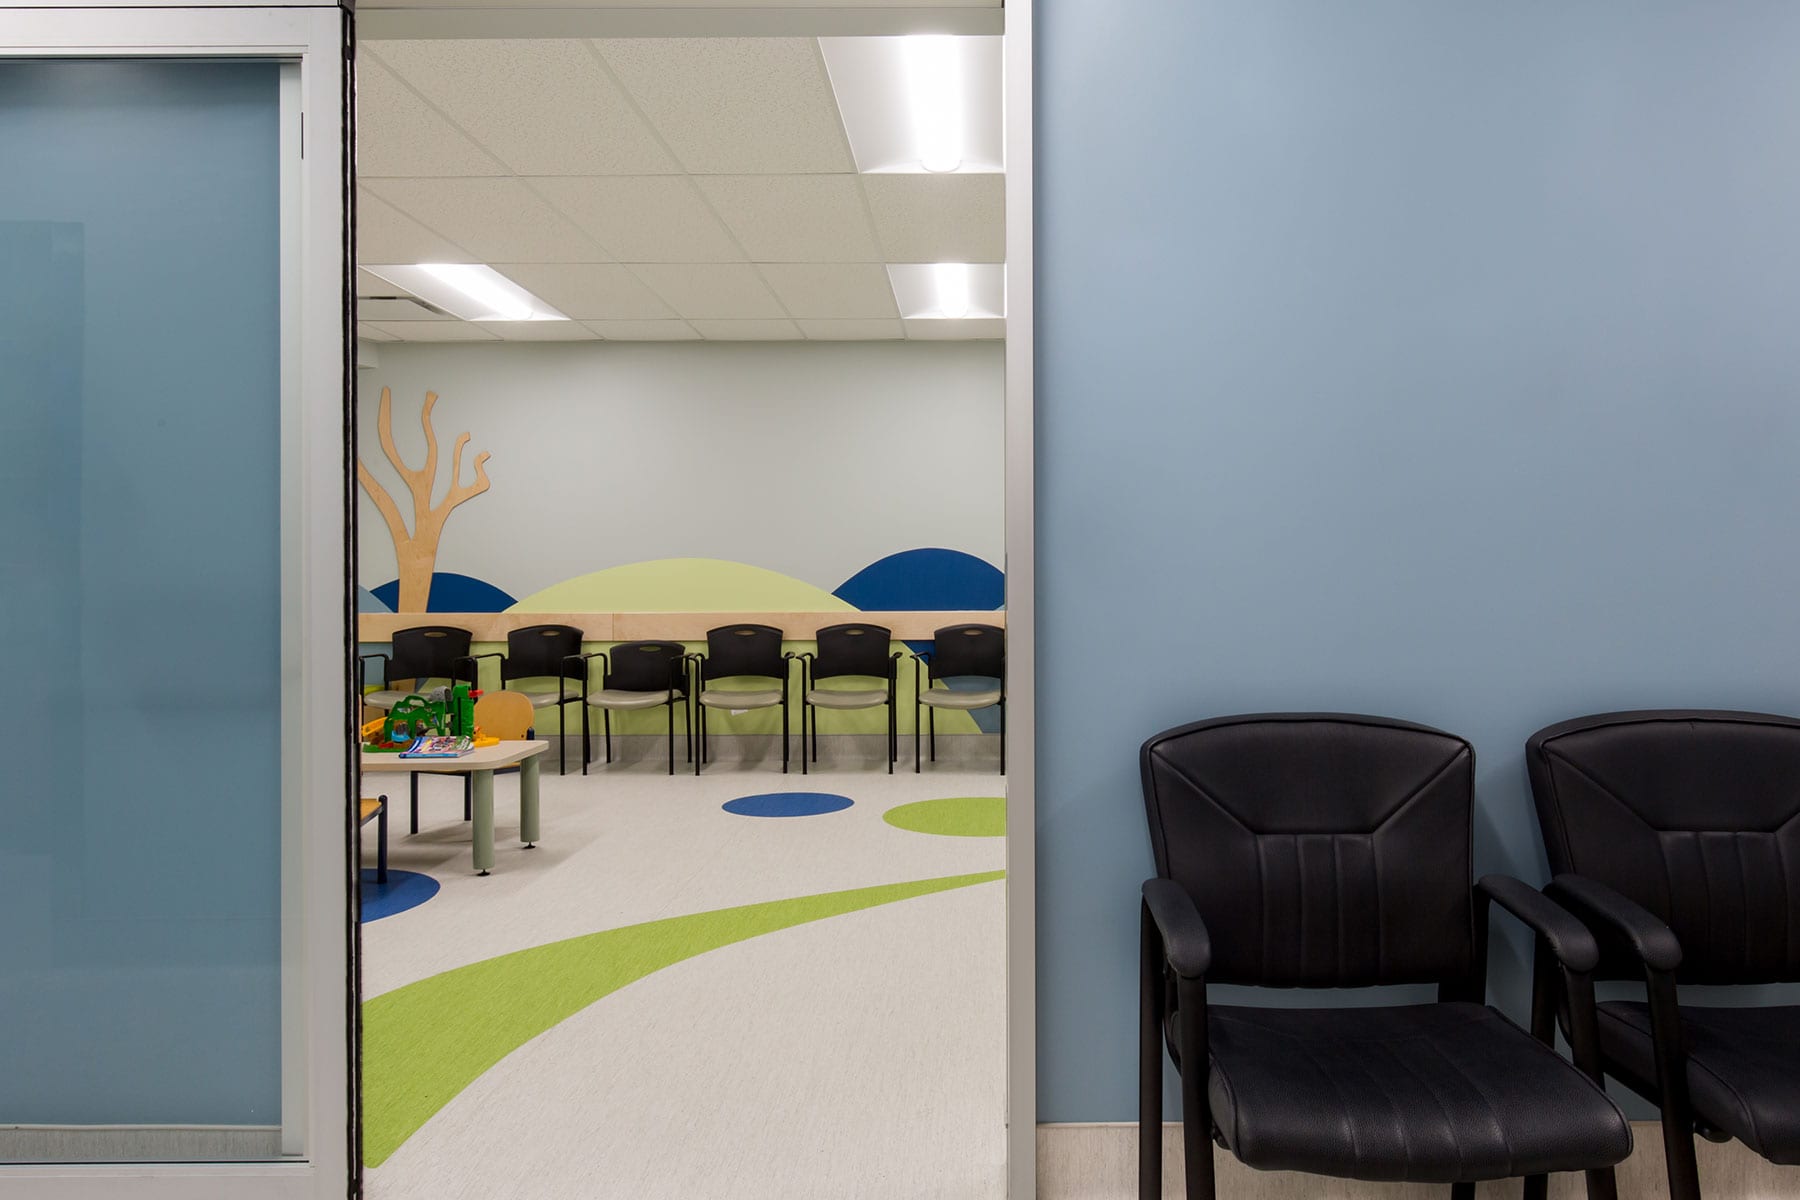 Healthcare renovation project for BC Children's women's hospital - waiting room, confidential intake area for patients